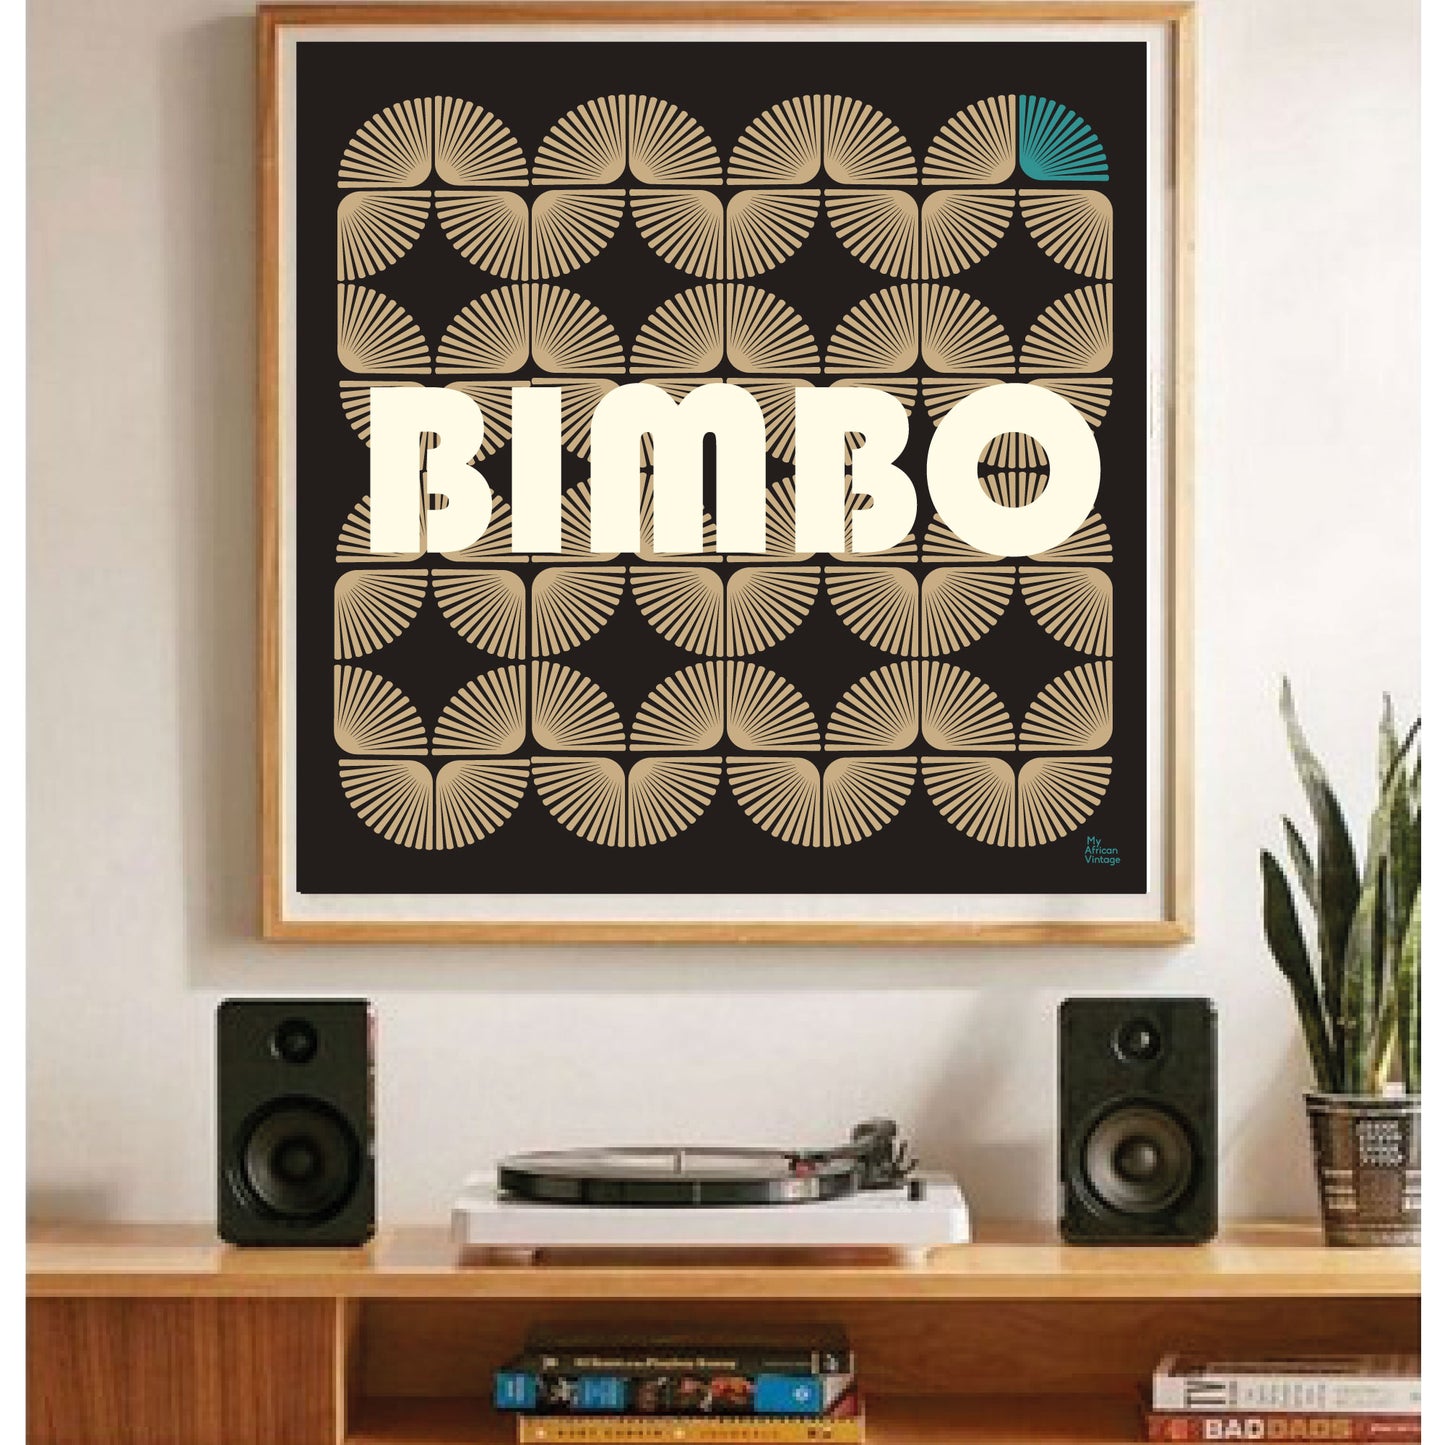 "Bimbo" retro style poster - "My African Vintage" collection